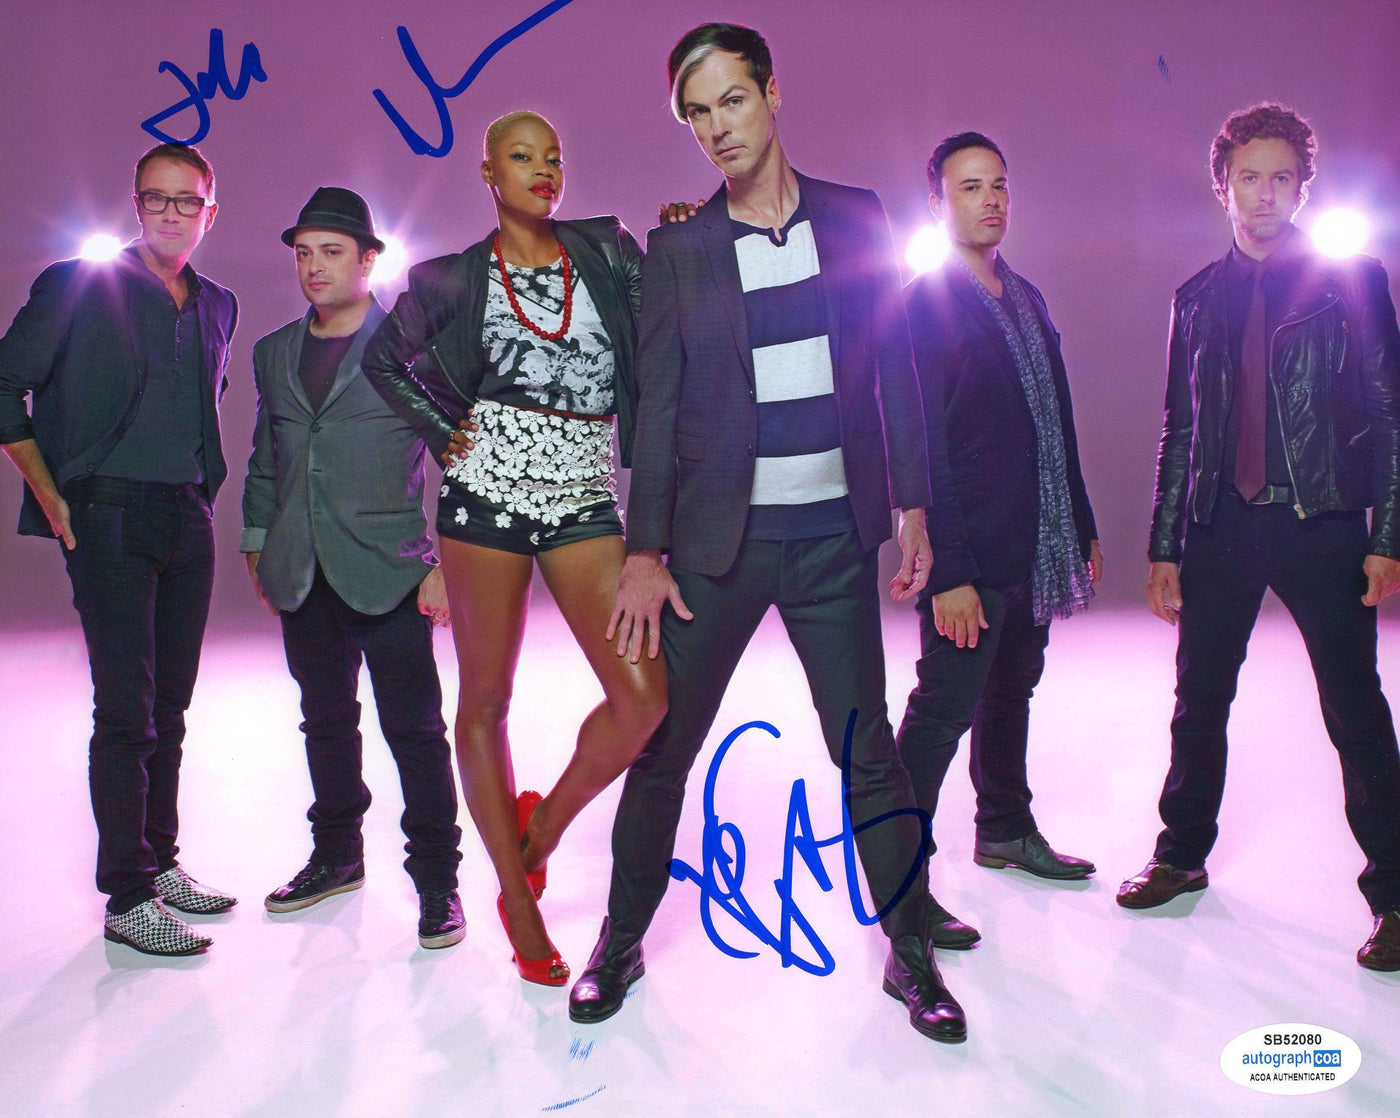 Fitz and the Tantrums Band Members Signed 8x10 Photo ACOA